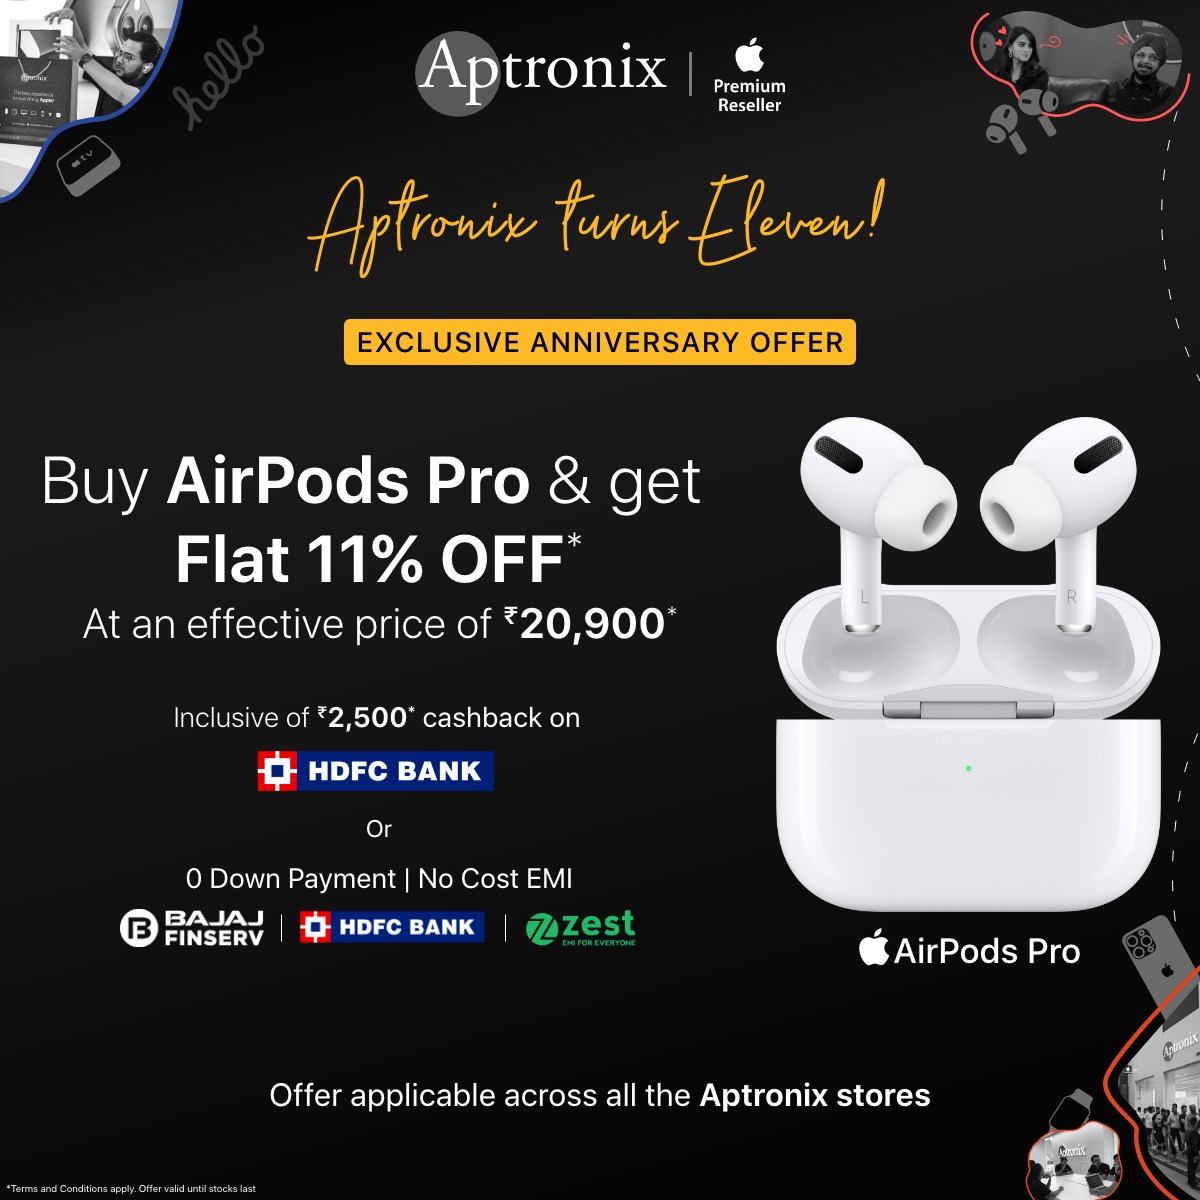 Airpods offers